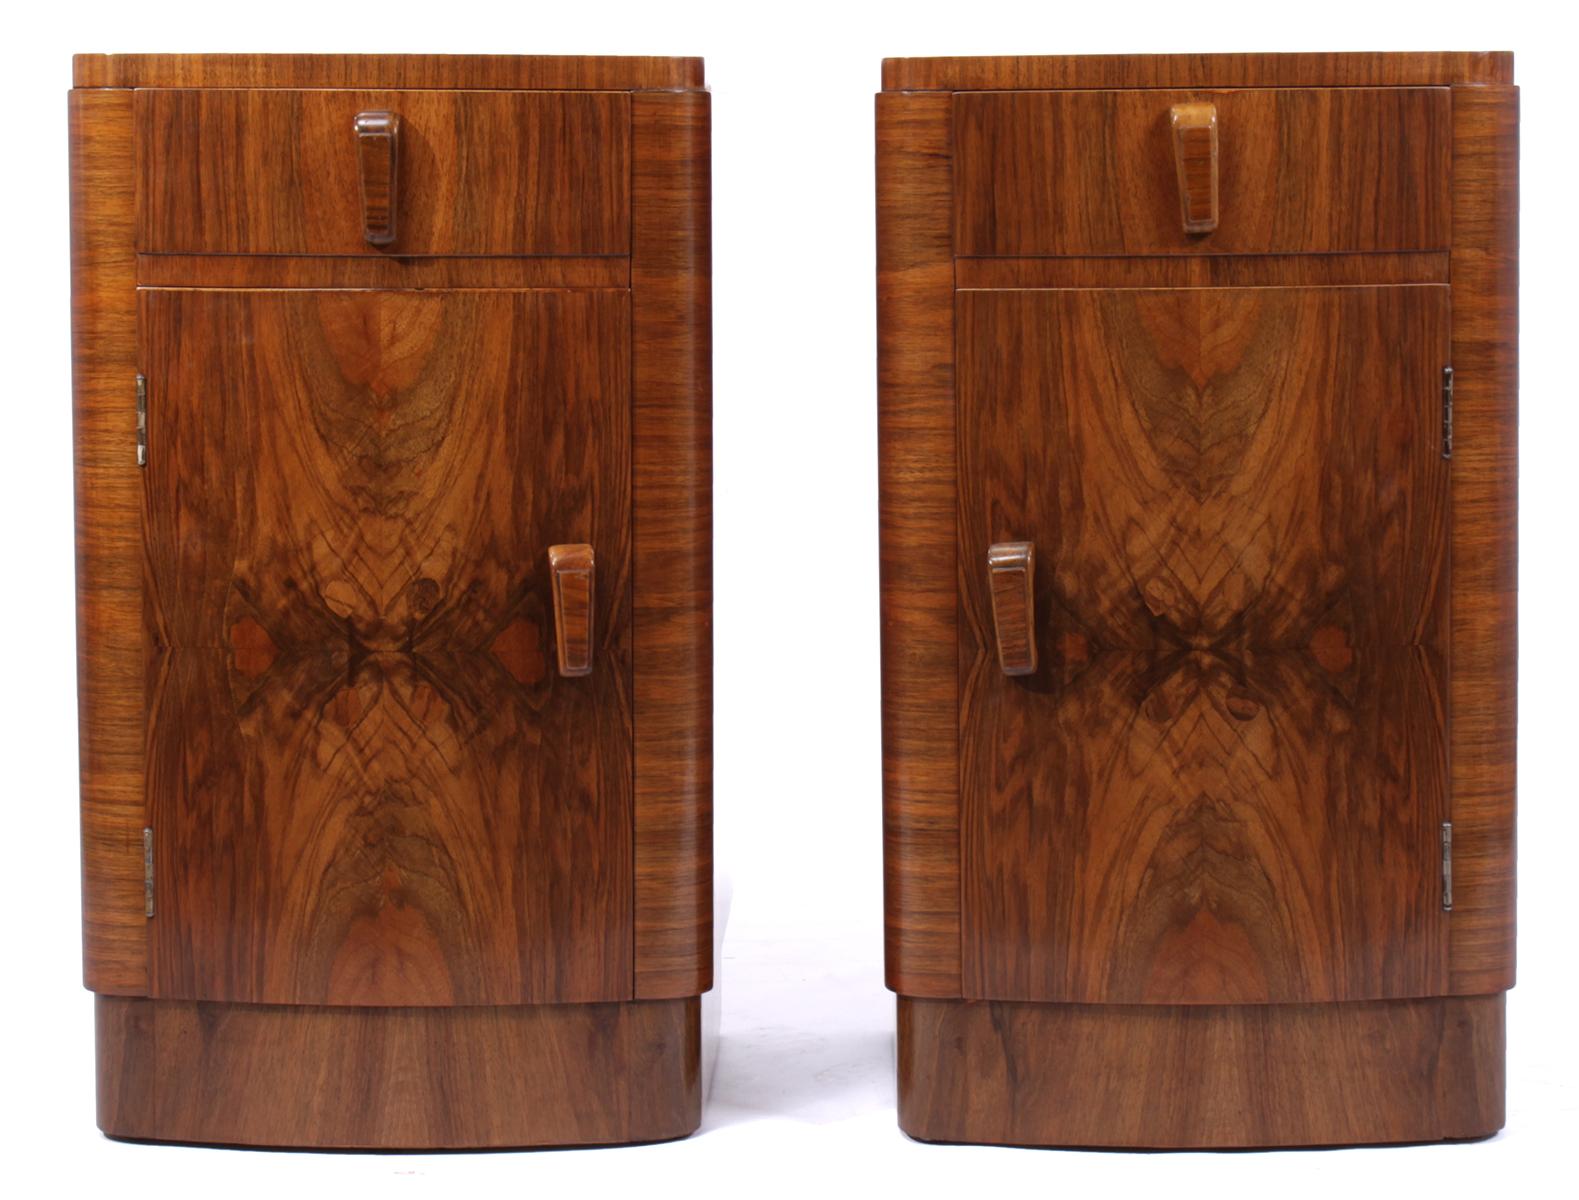 Pair of Art Deco bedside cabinets
An opposite pair of art deco walnut side cabinets with bow front, single drawer with door below fully restored and hand polished and in excellent condition throughout

Age: 1930

Style: Art Deco

Material: